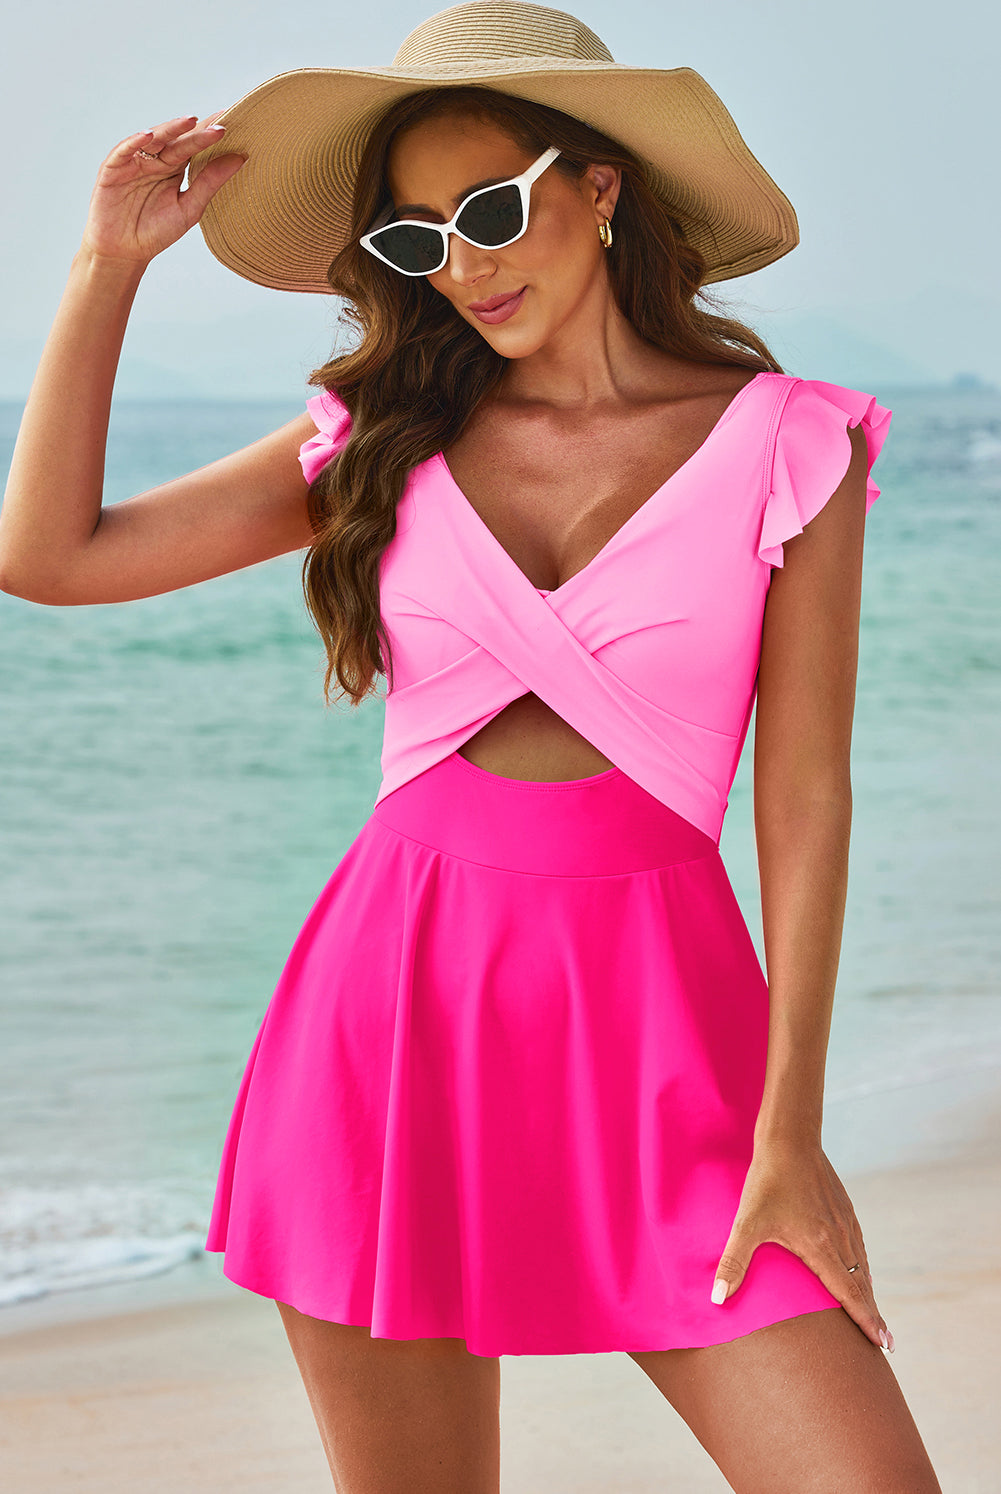 Model wearing a chic cutout one-piece swimsuit, available in black and pink options